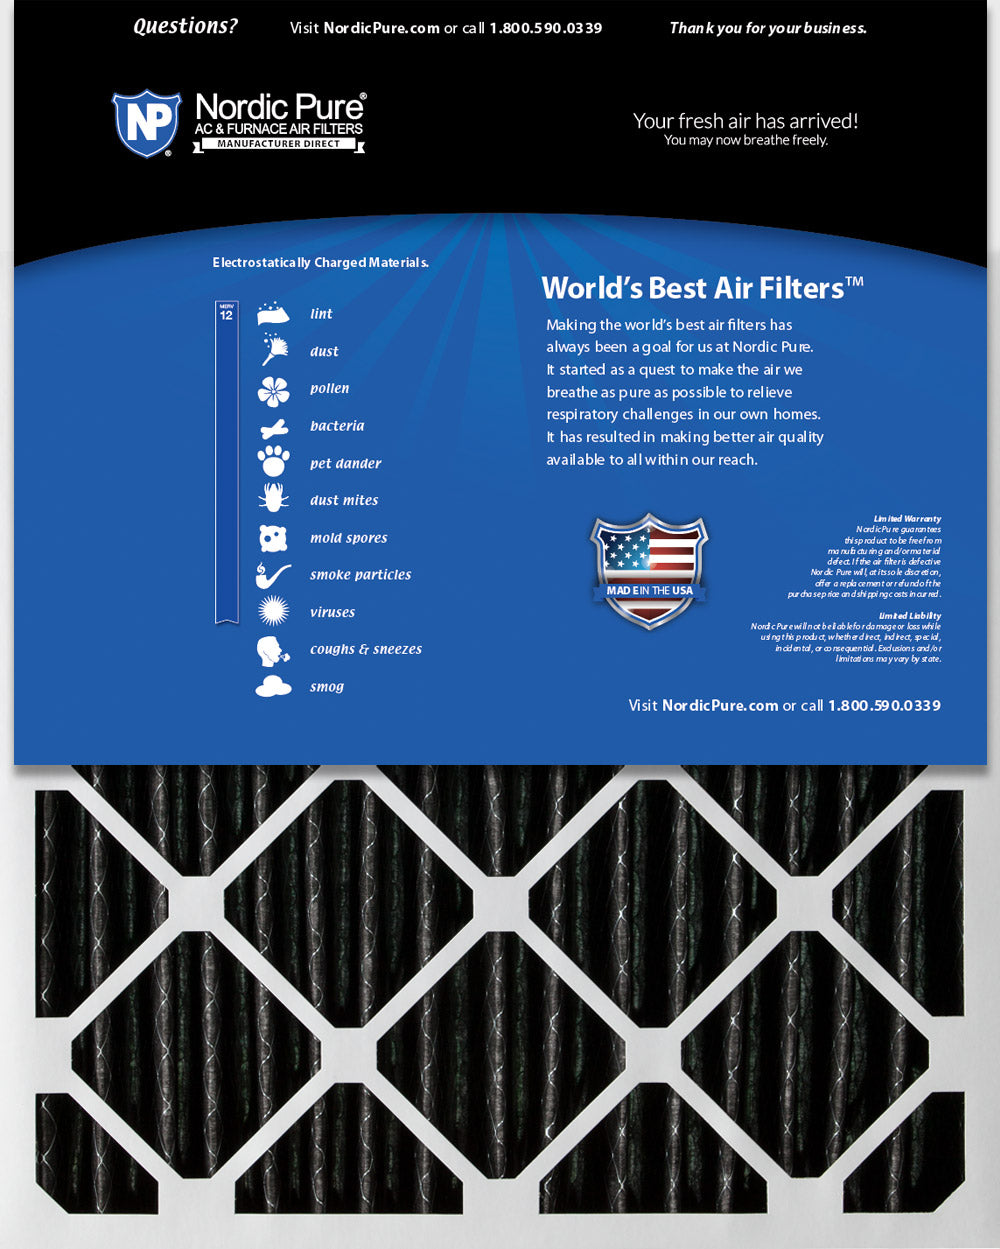 12x25x2 Furnace Air Filters MERV 12 Pleated Plus Carbon